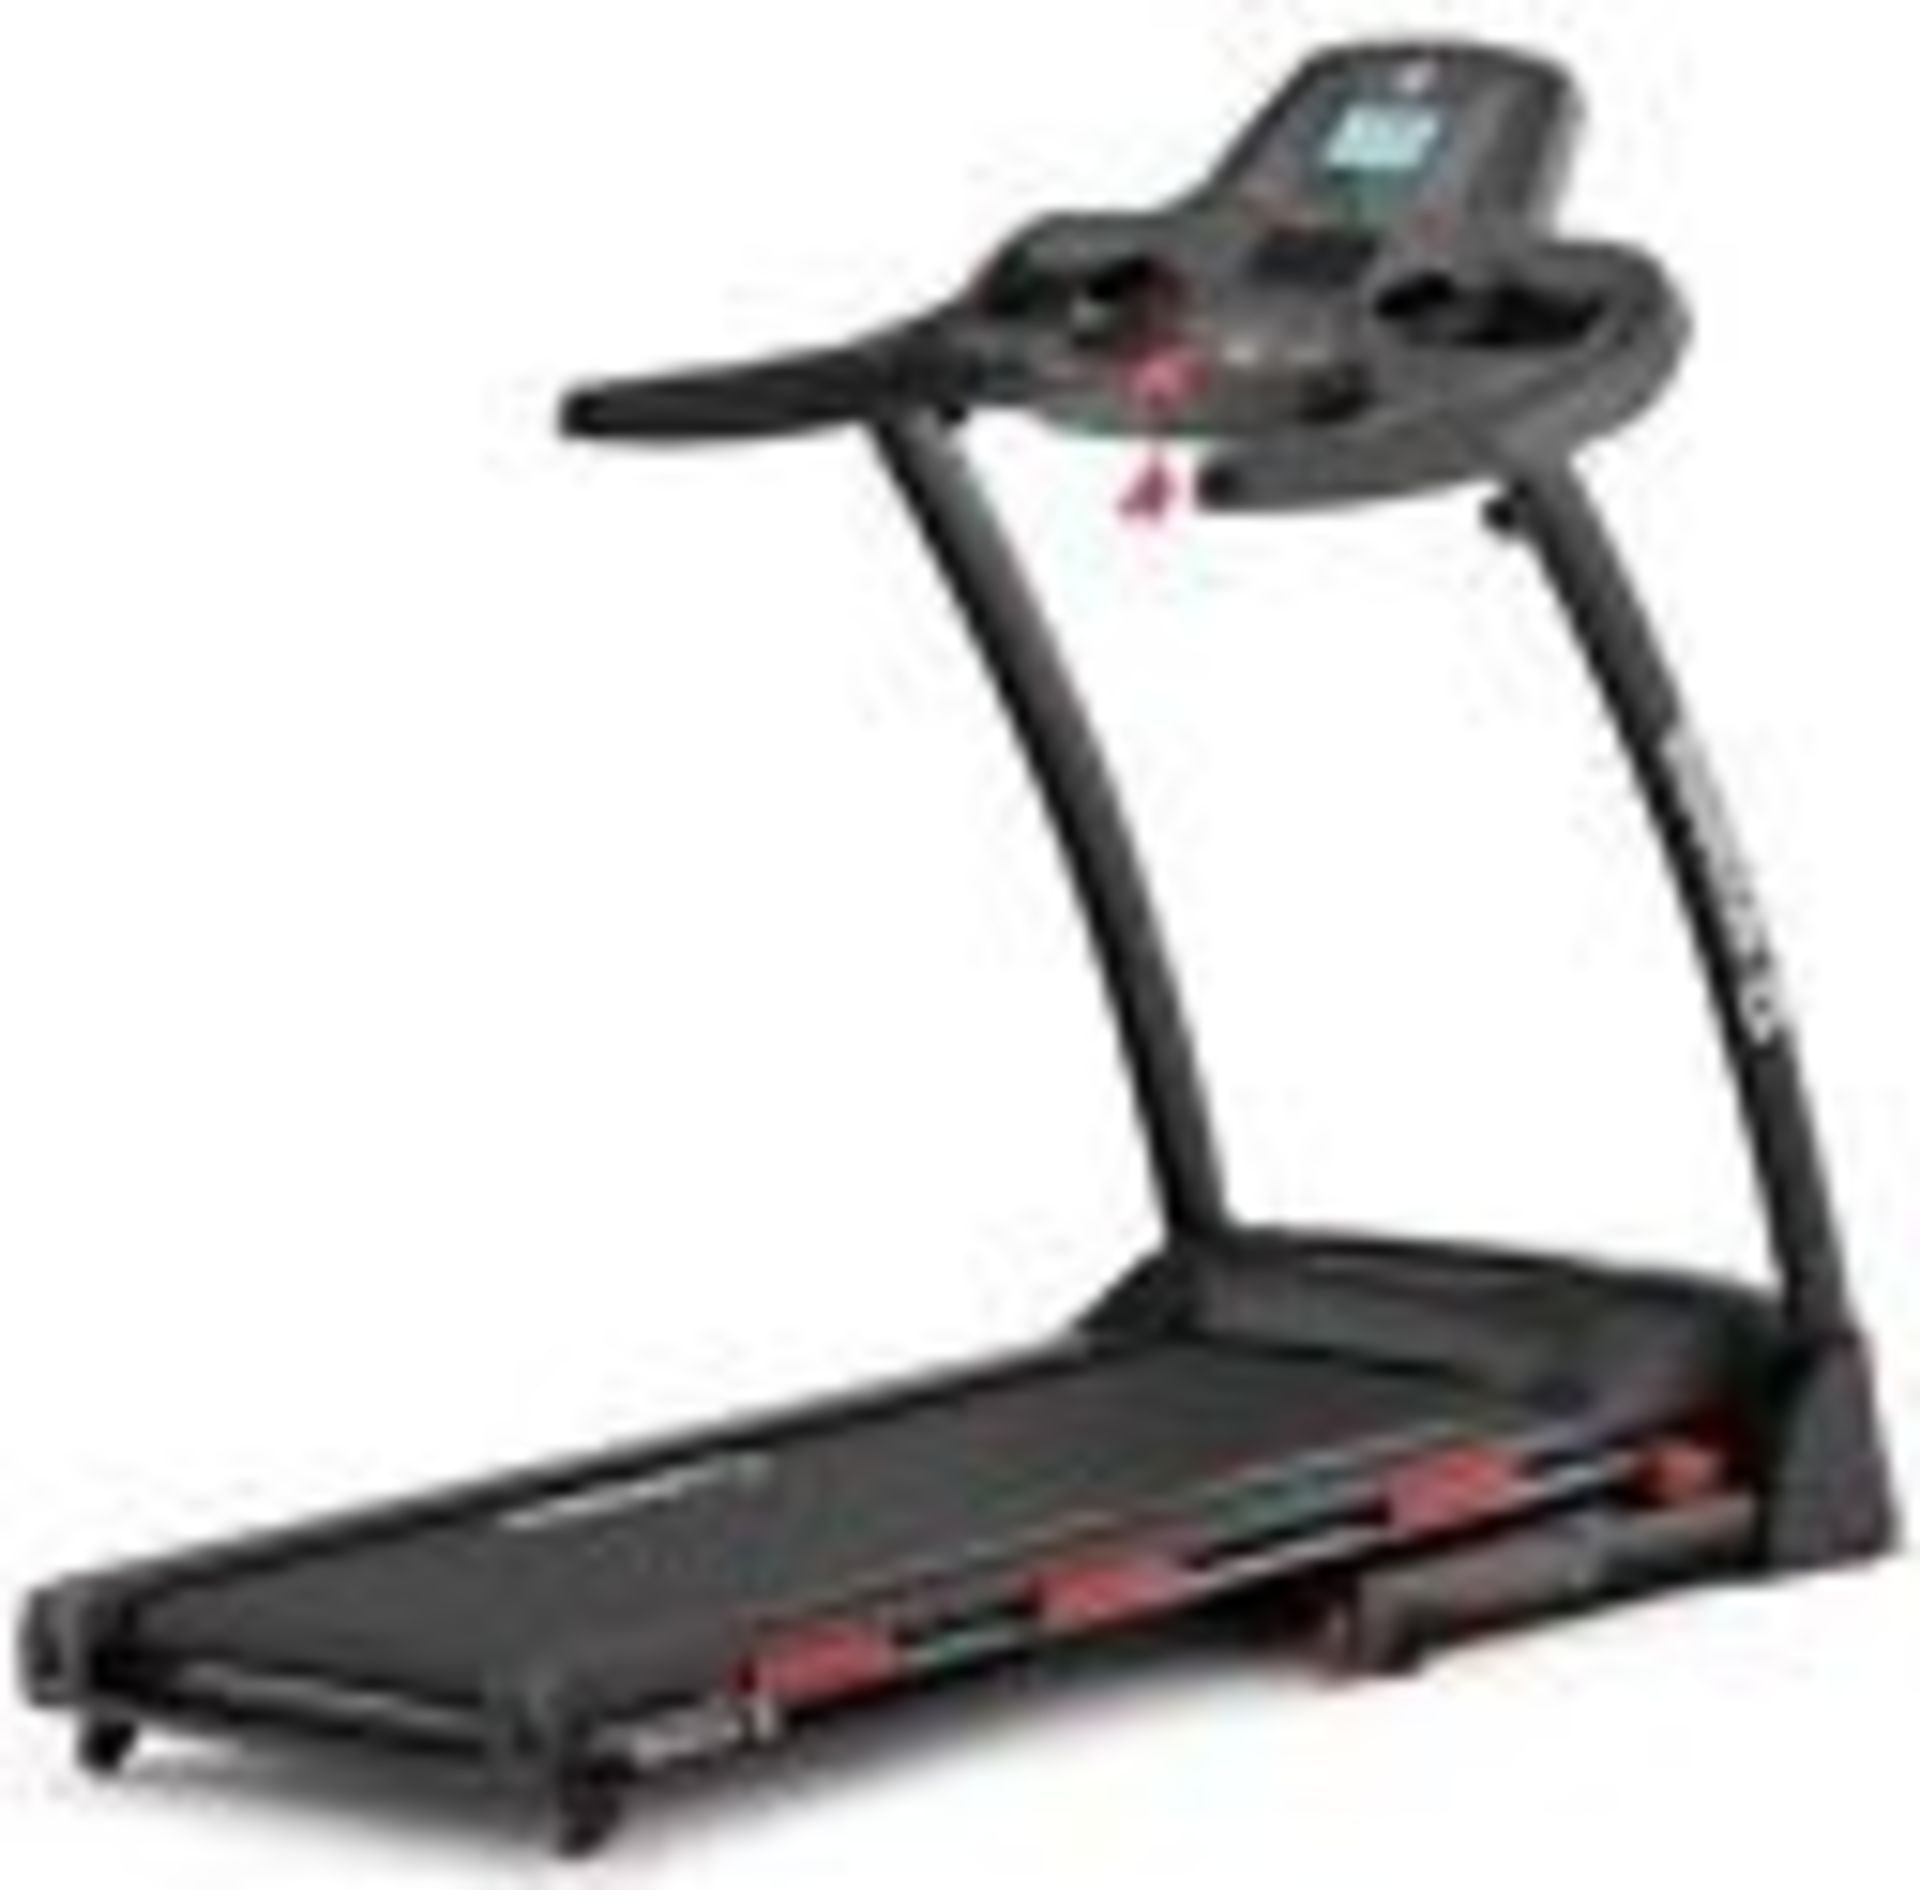 1 X BOXED REEBOK GT40S TREADMILL IN BLACK - IN 1 BOX ( PLEASE NOTE CUSTOMER RETURN AND DAMAGE ON BOX